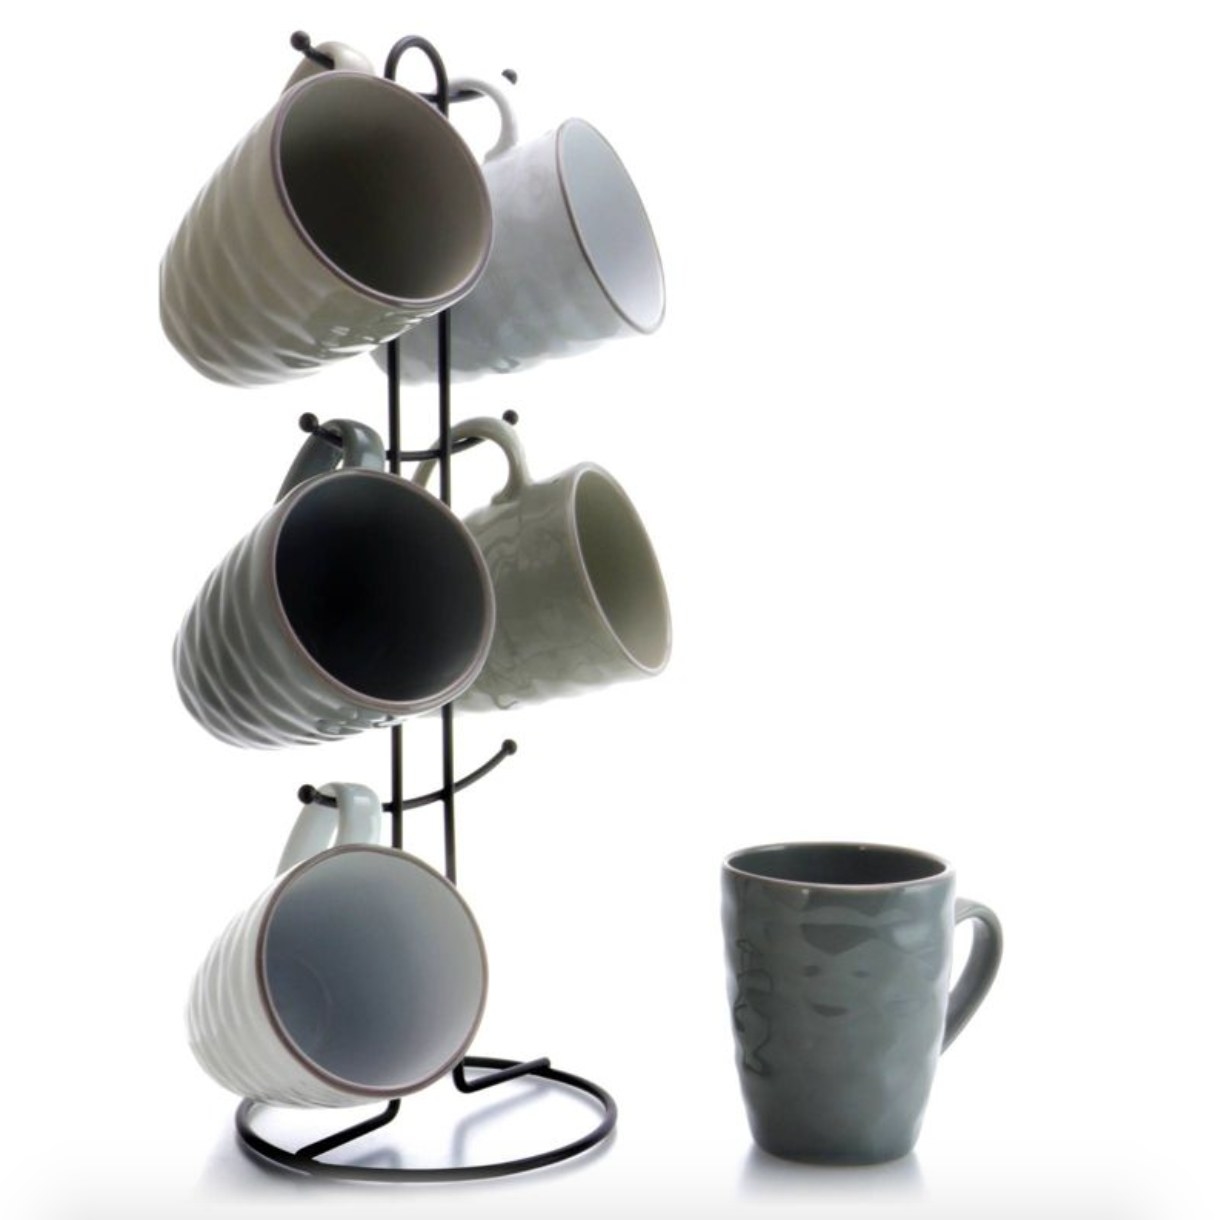 the glazed stoneware mugs in neutral shades hanging on their stand